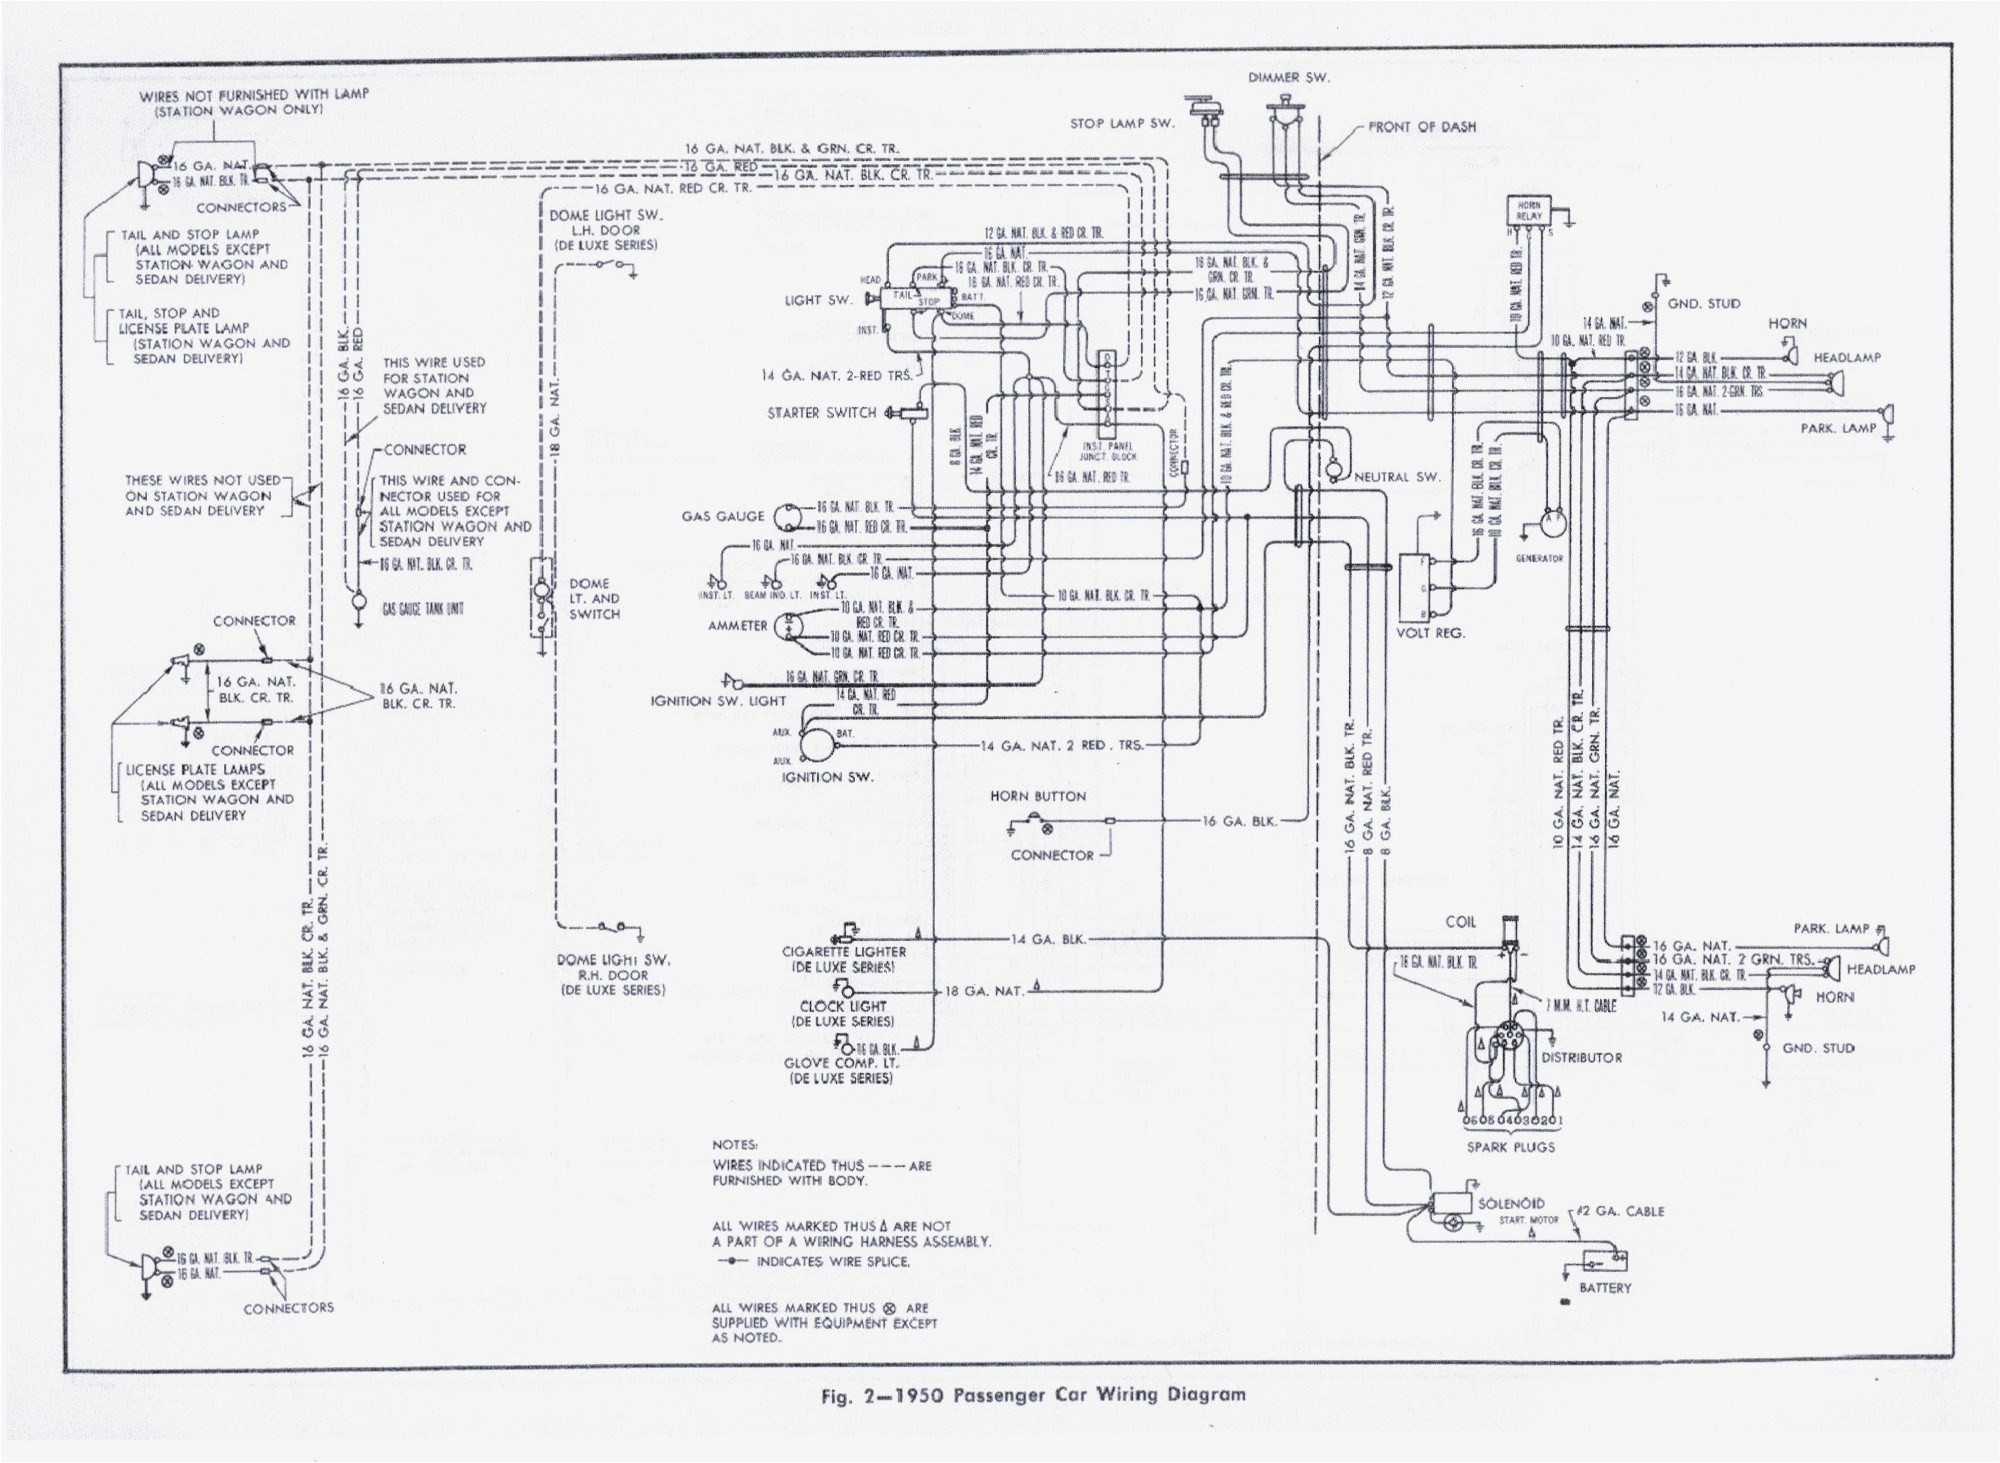 Razor Electric Scooter Wiring Diagram New Wiring Diagram for Electric Razor Scooter Best Pride Electric